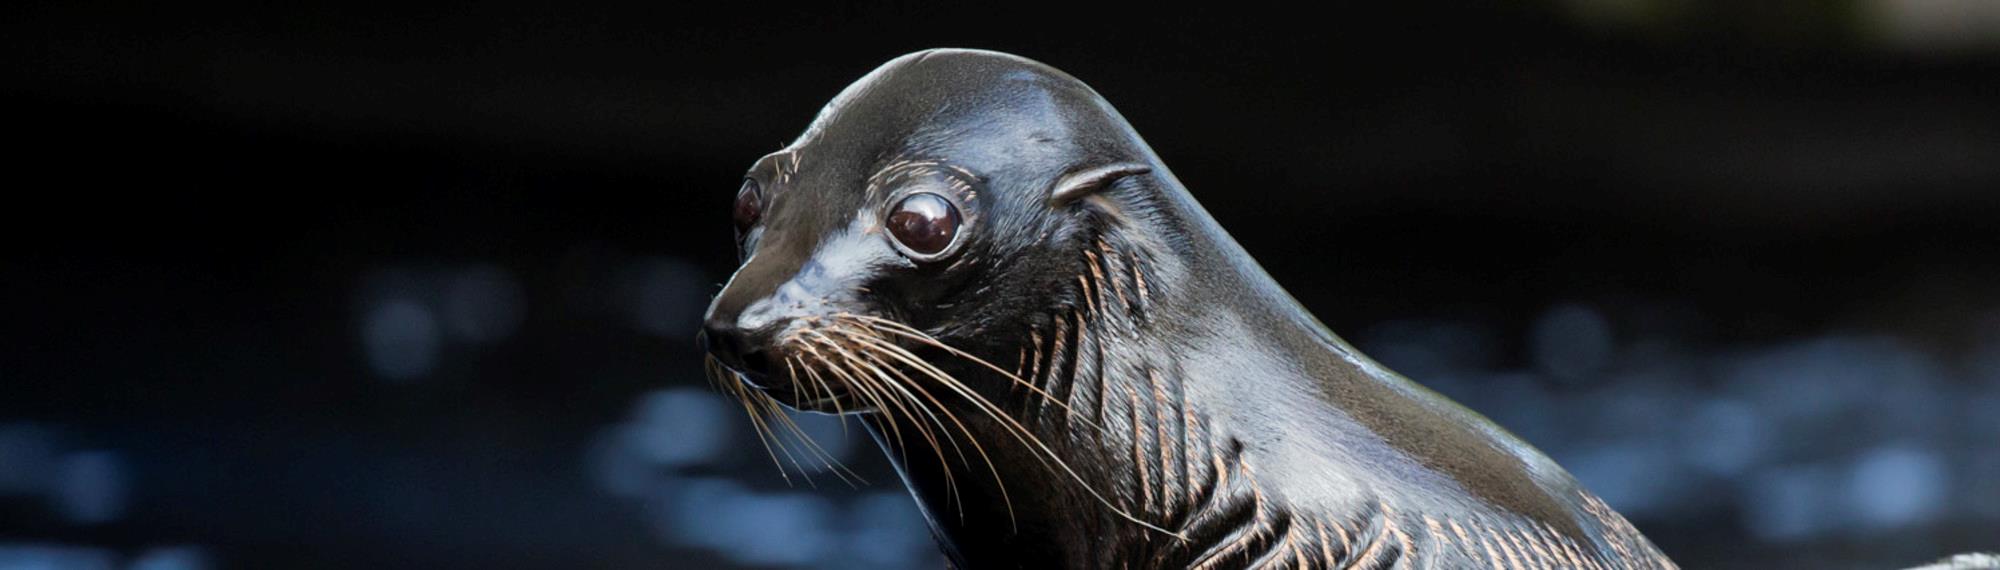 The Australian Fur-Seal, shown from the front-left.